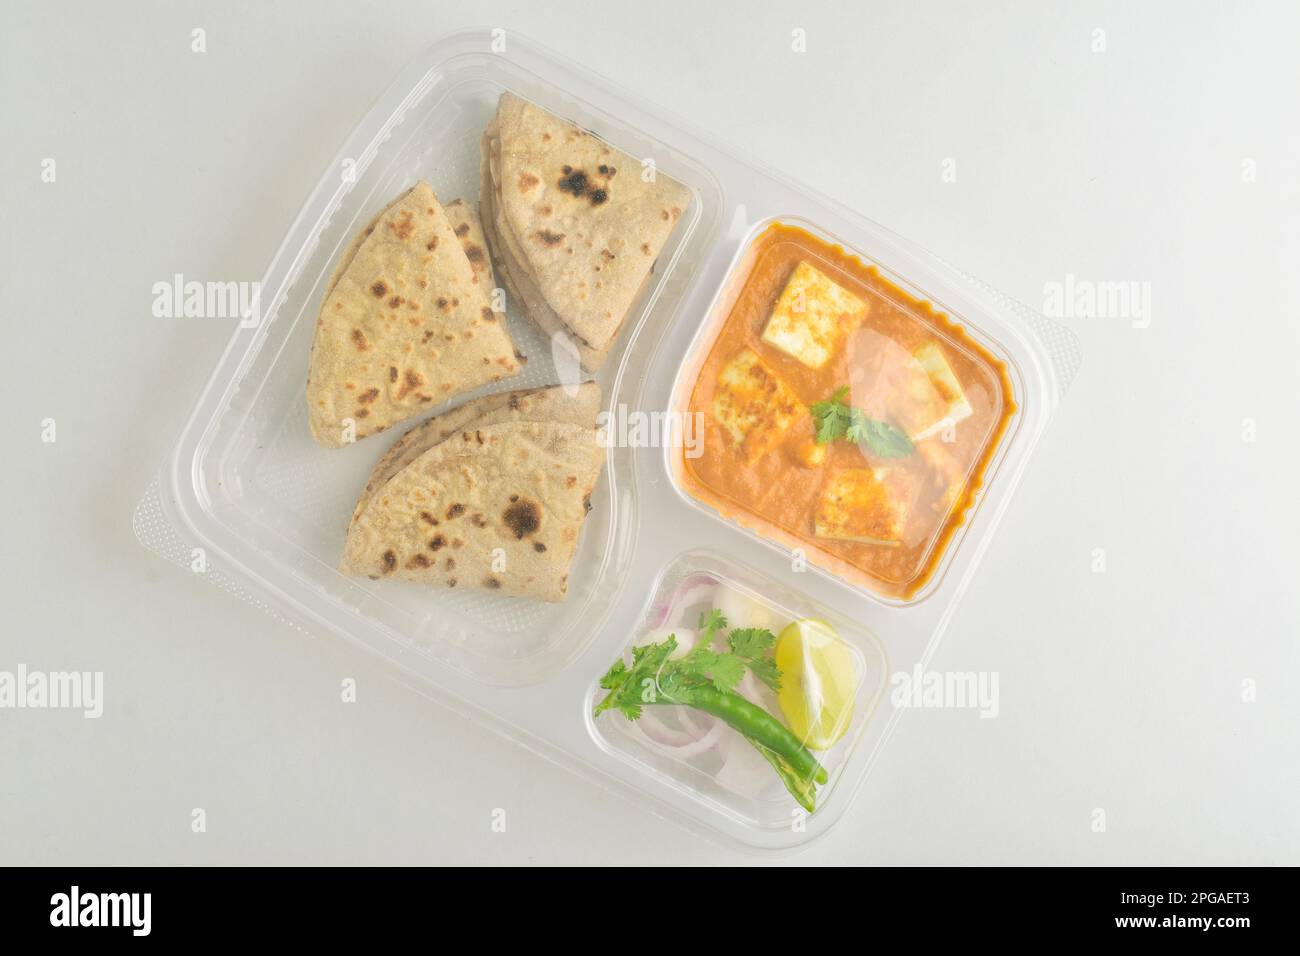 Roti sabji with salad in disposable plate on white background, top view Stock Photo